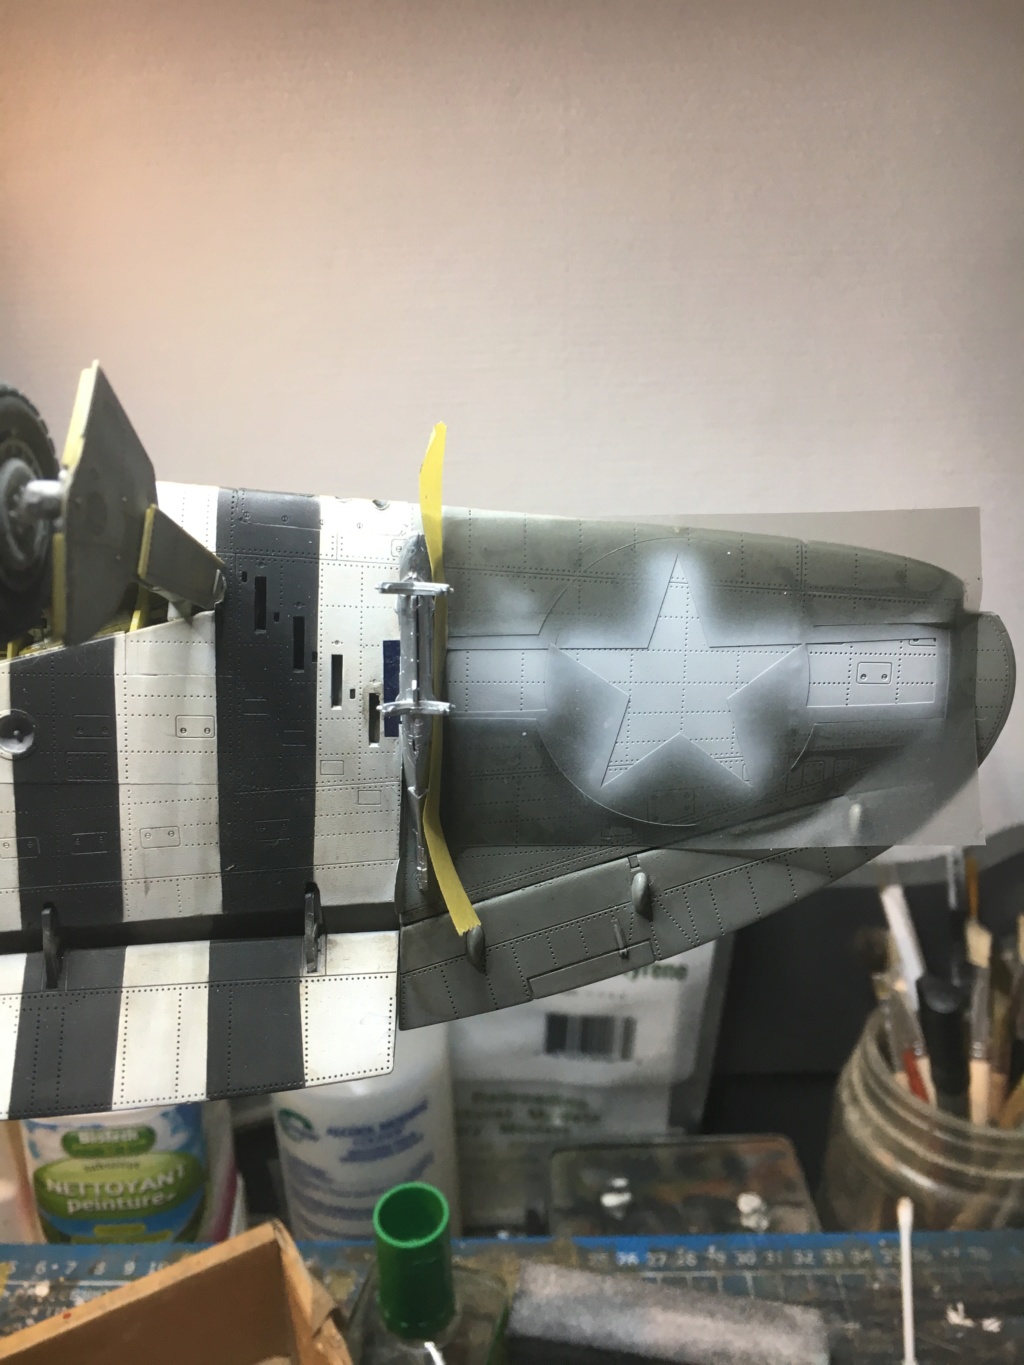 P47-D razorback 1/32 TRUMPETER  - Page 5 Star_a17